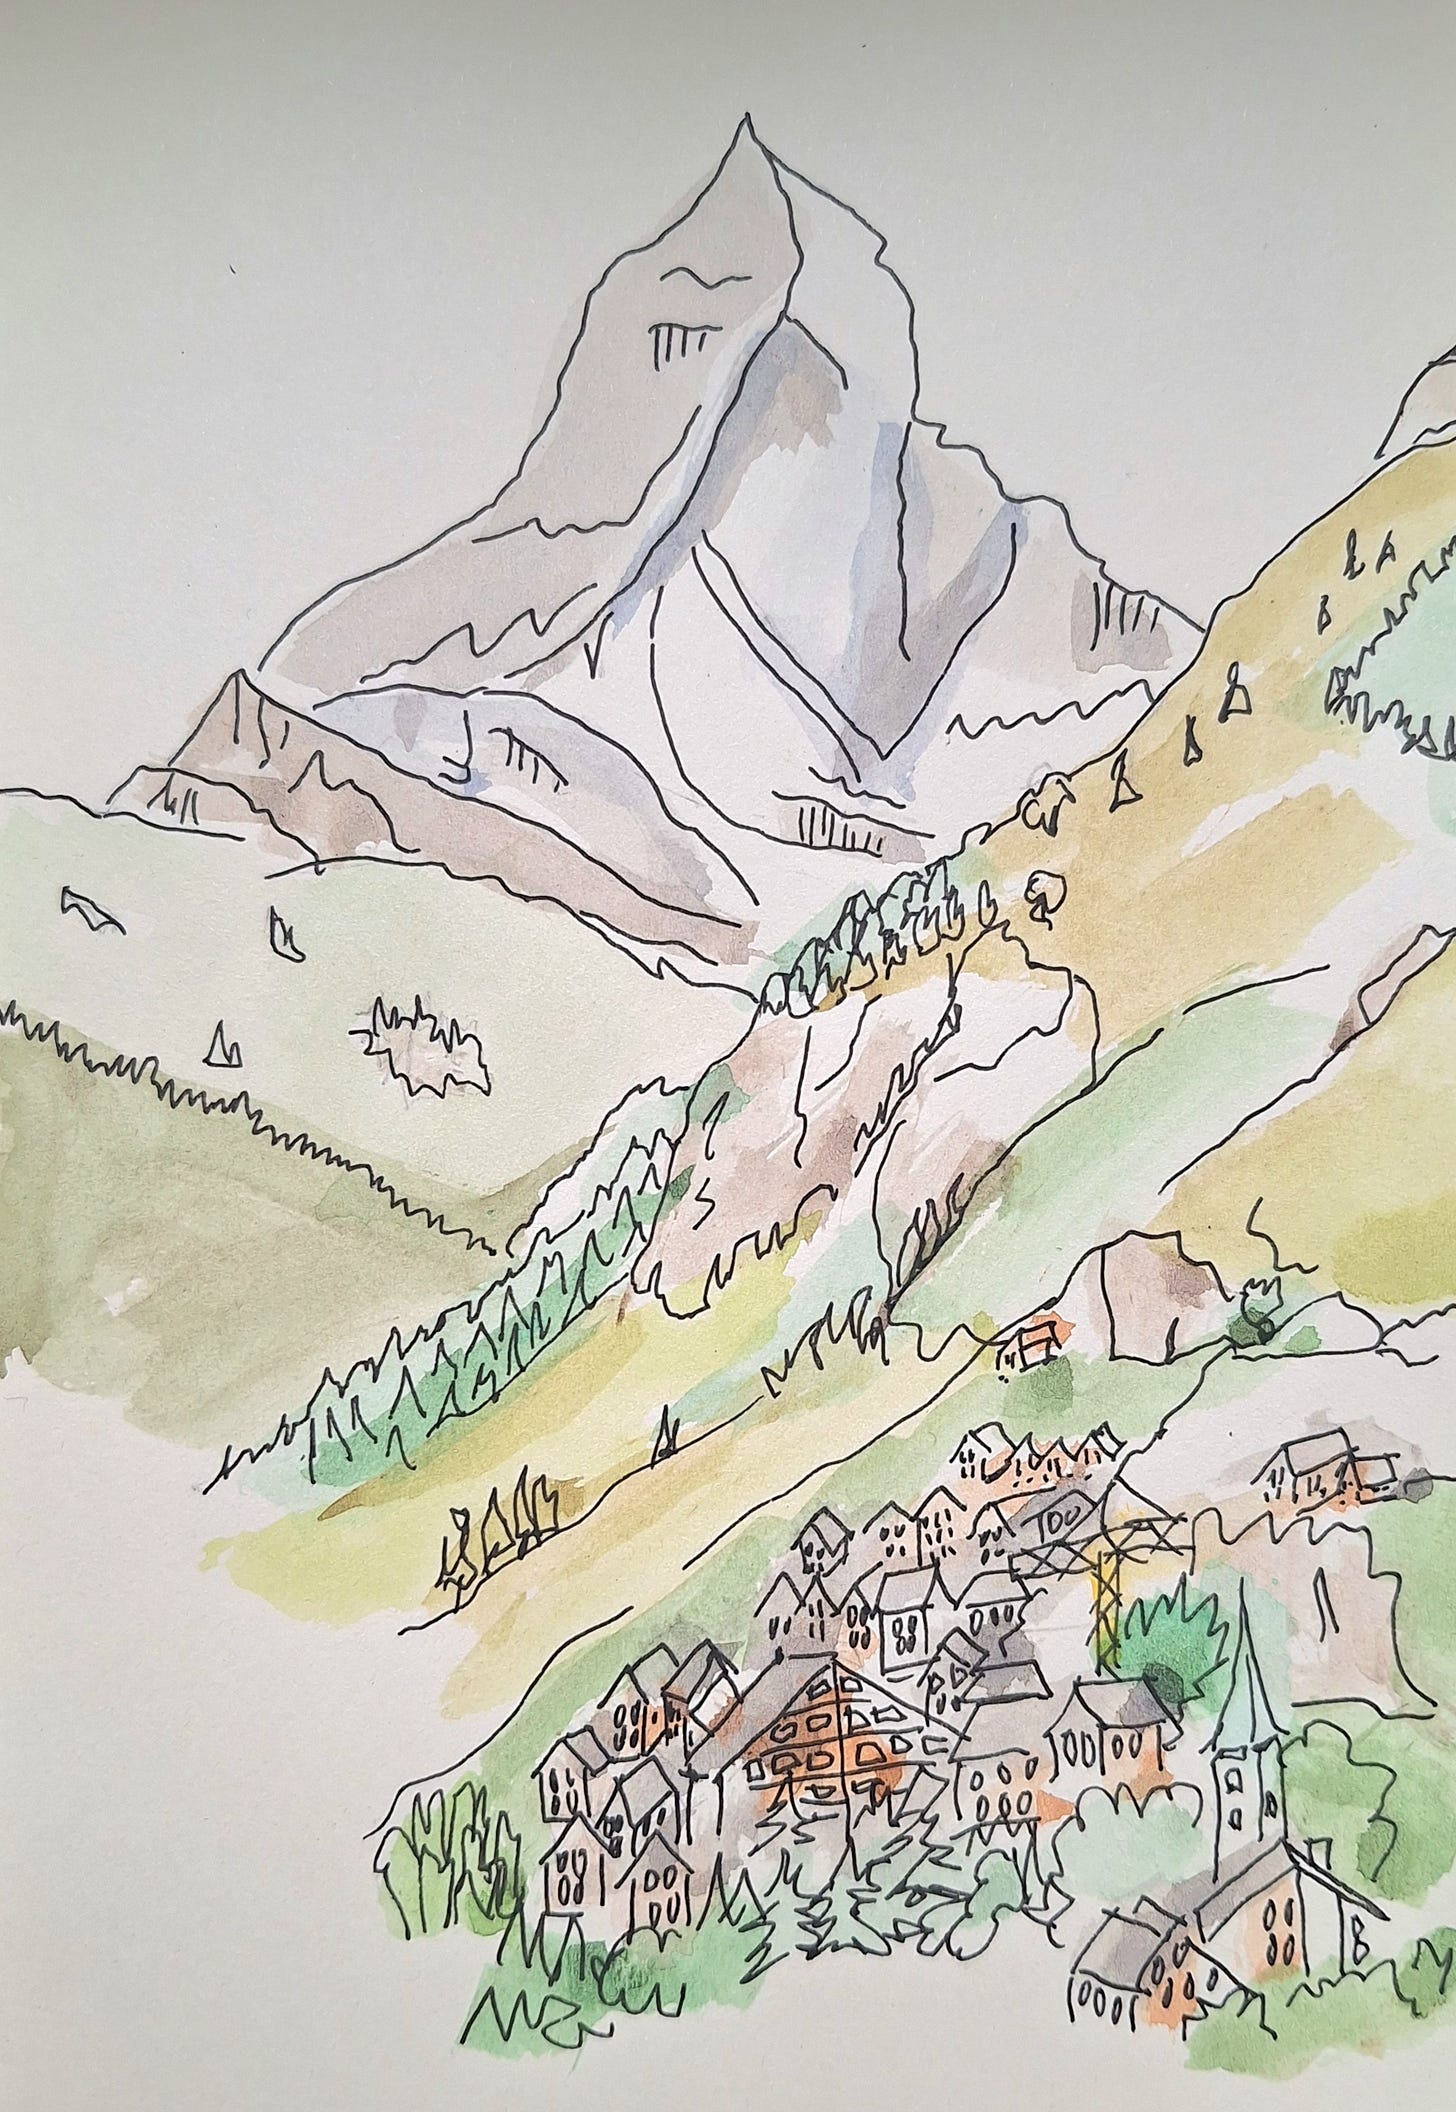 Pen and ink sketch with watercolour.  The Matterhorn with foothills and village in the foreground.